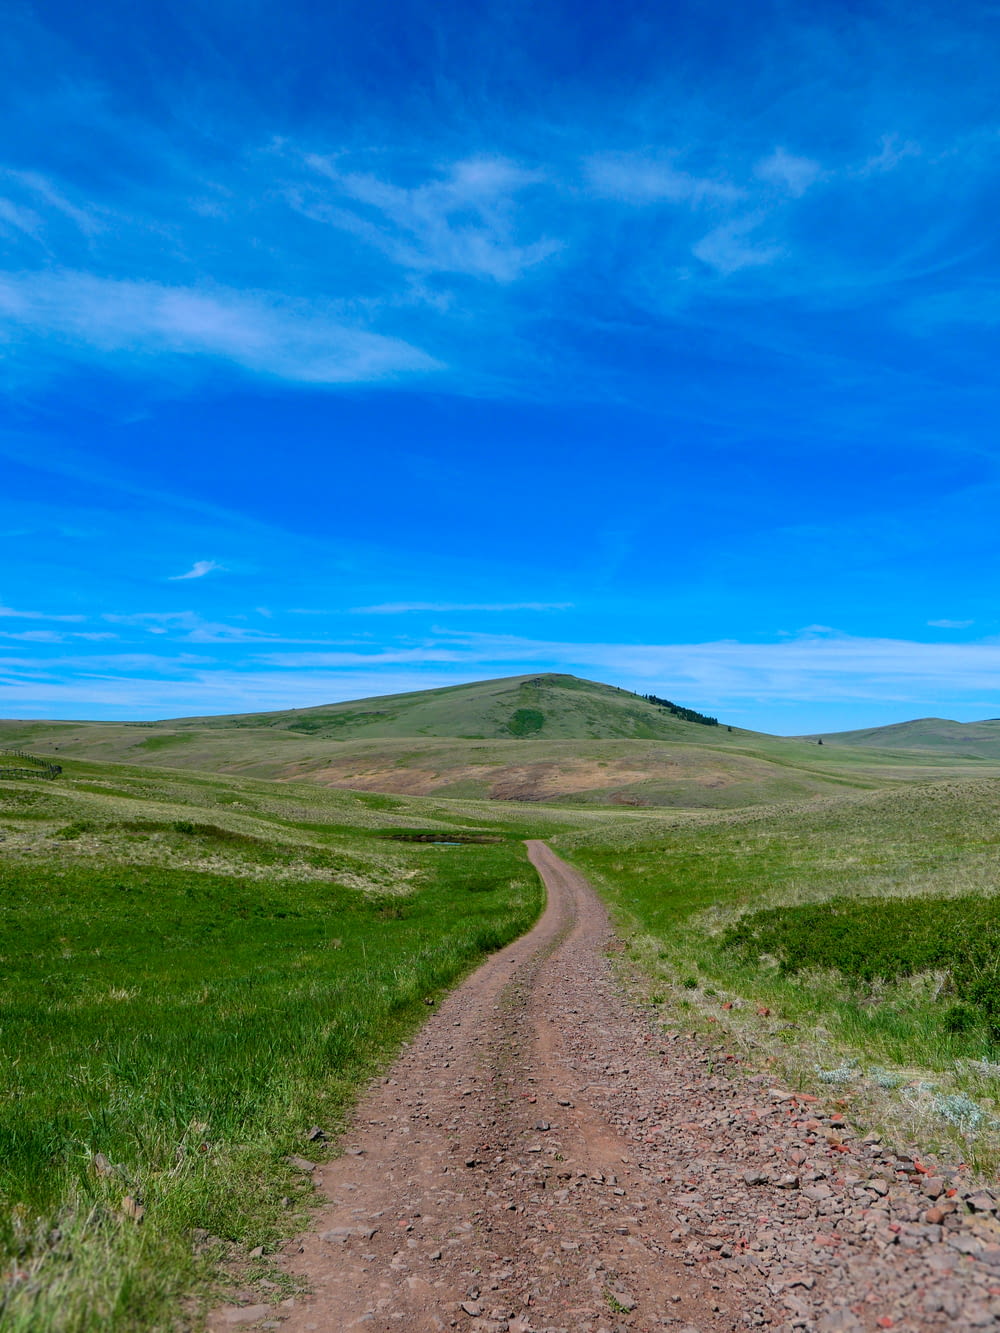 a dirt road leading up to a hill with a grassy hill in the background